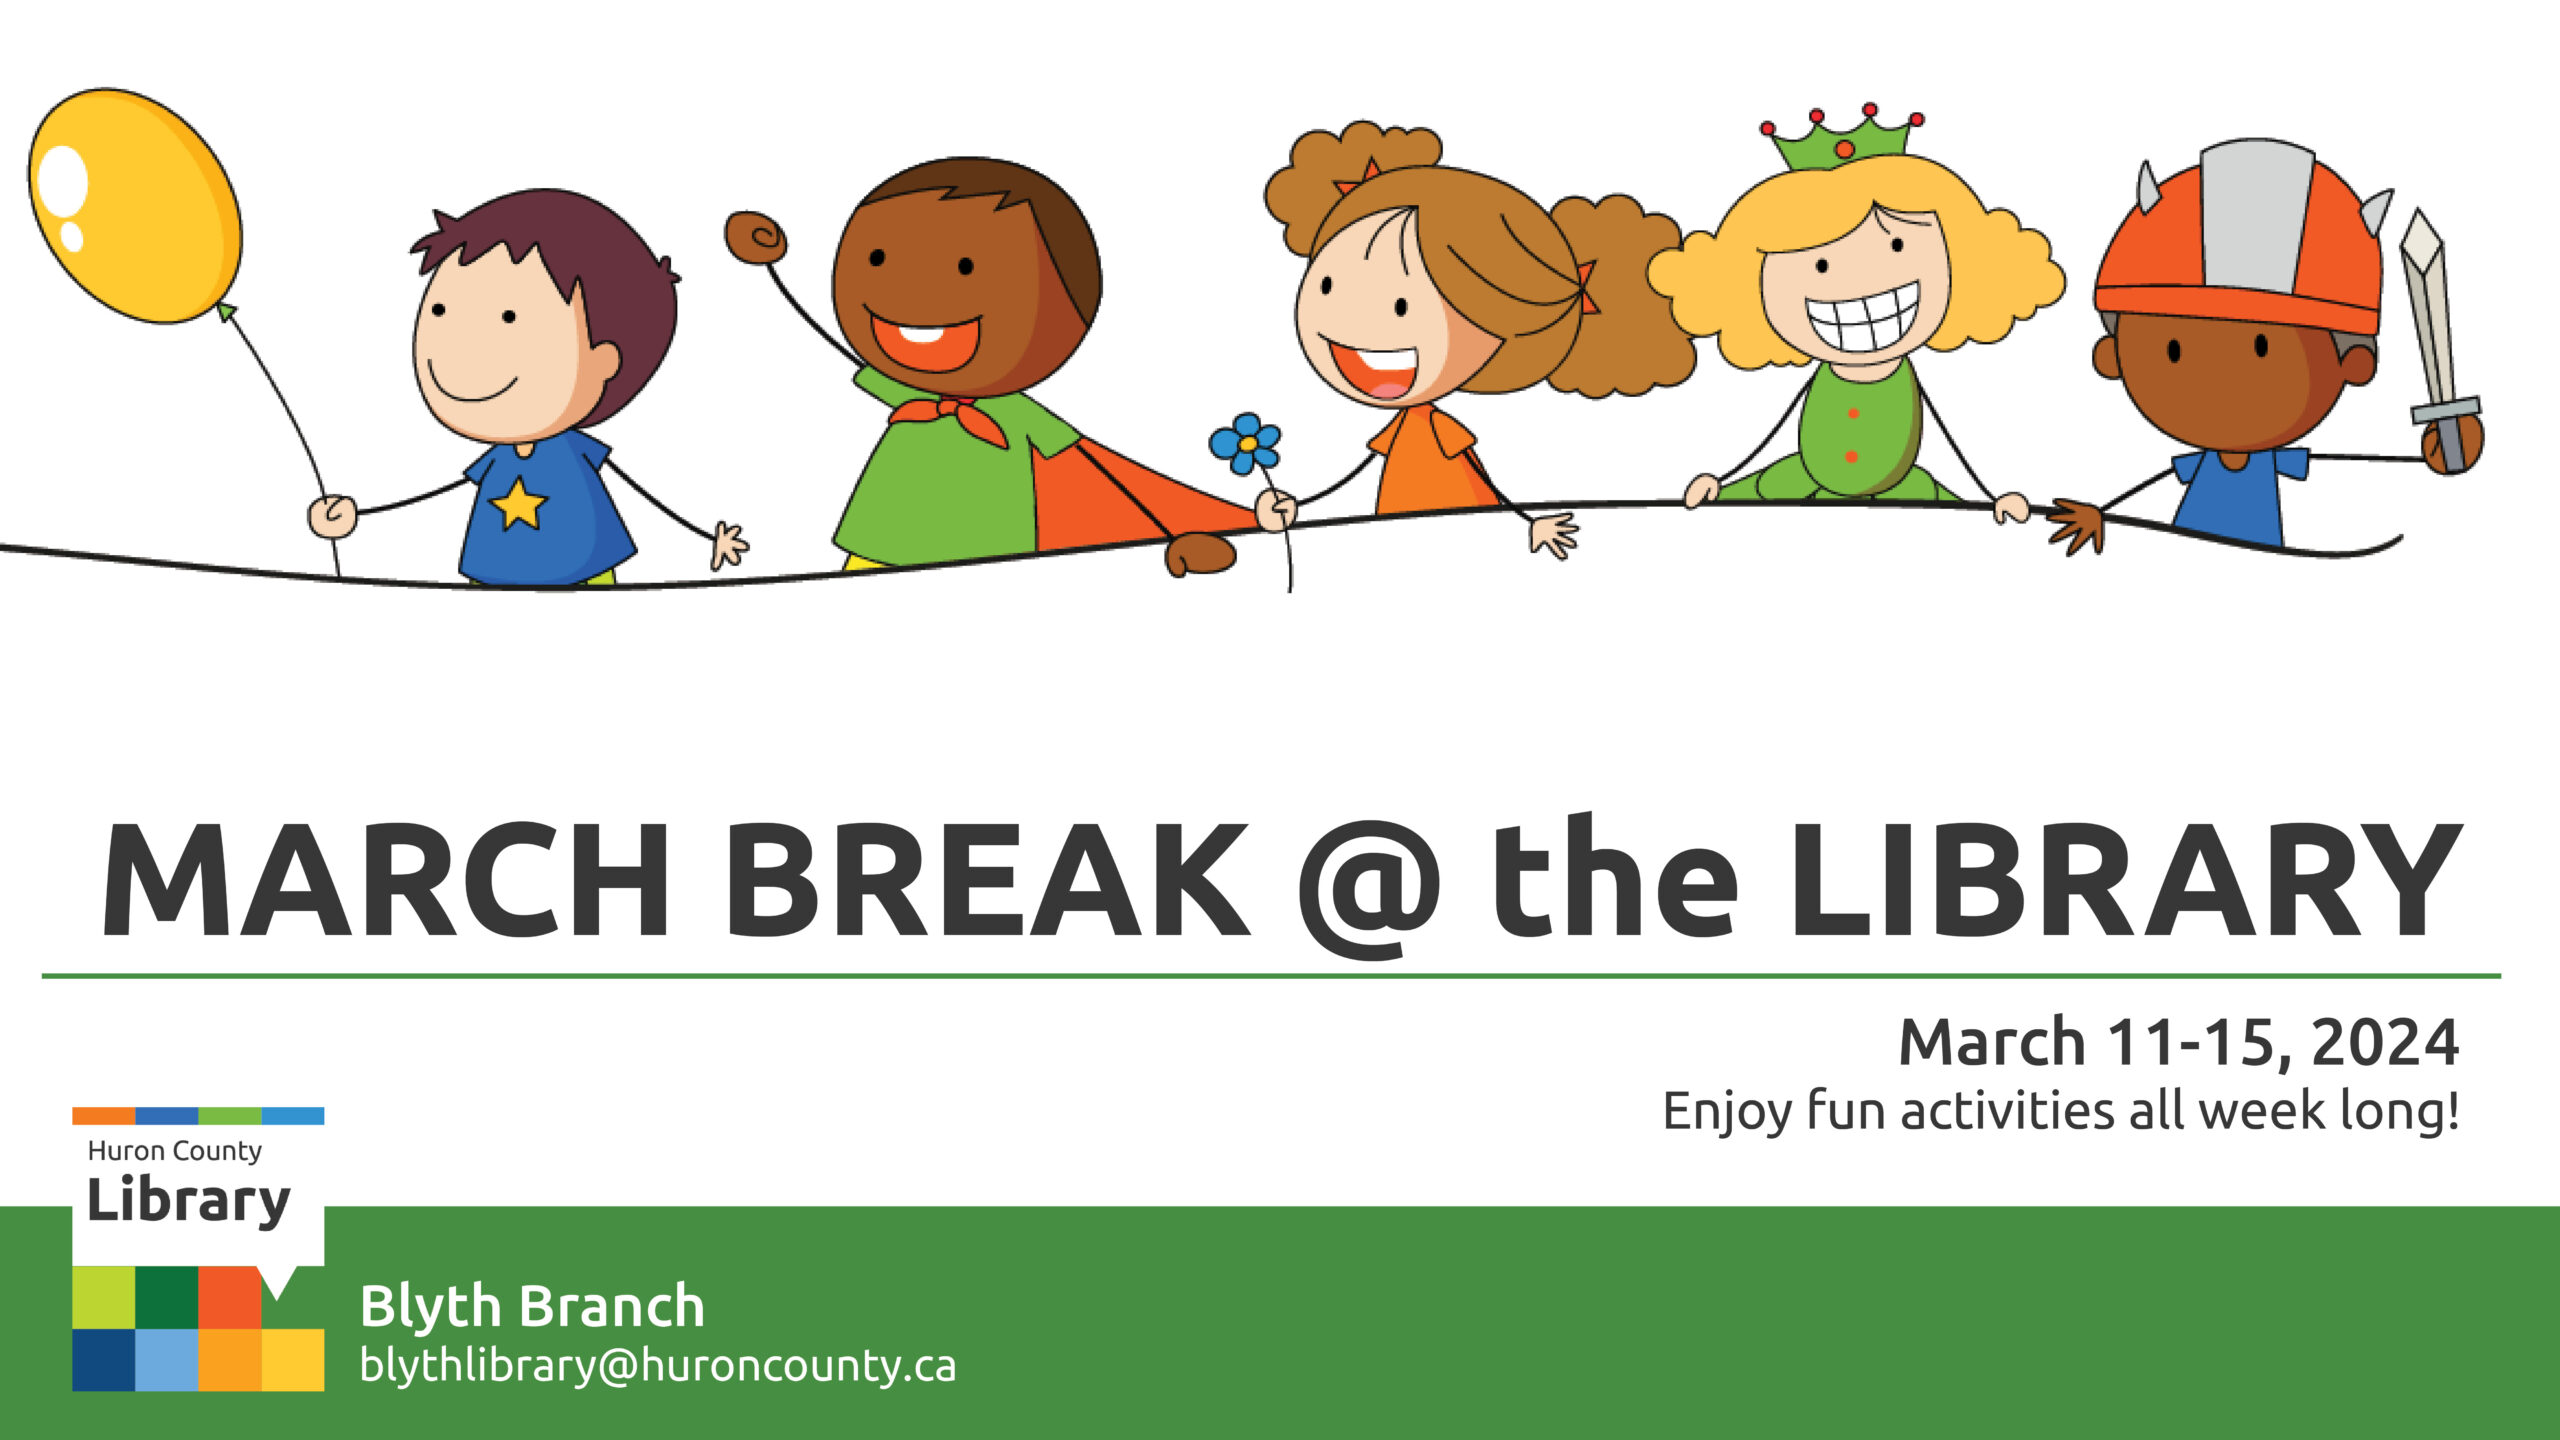 Illustration of kids having fun with text promoting March Break at the library